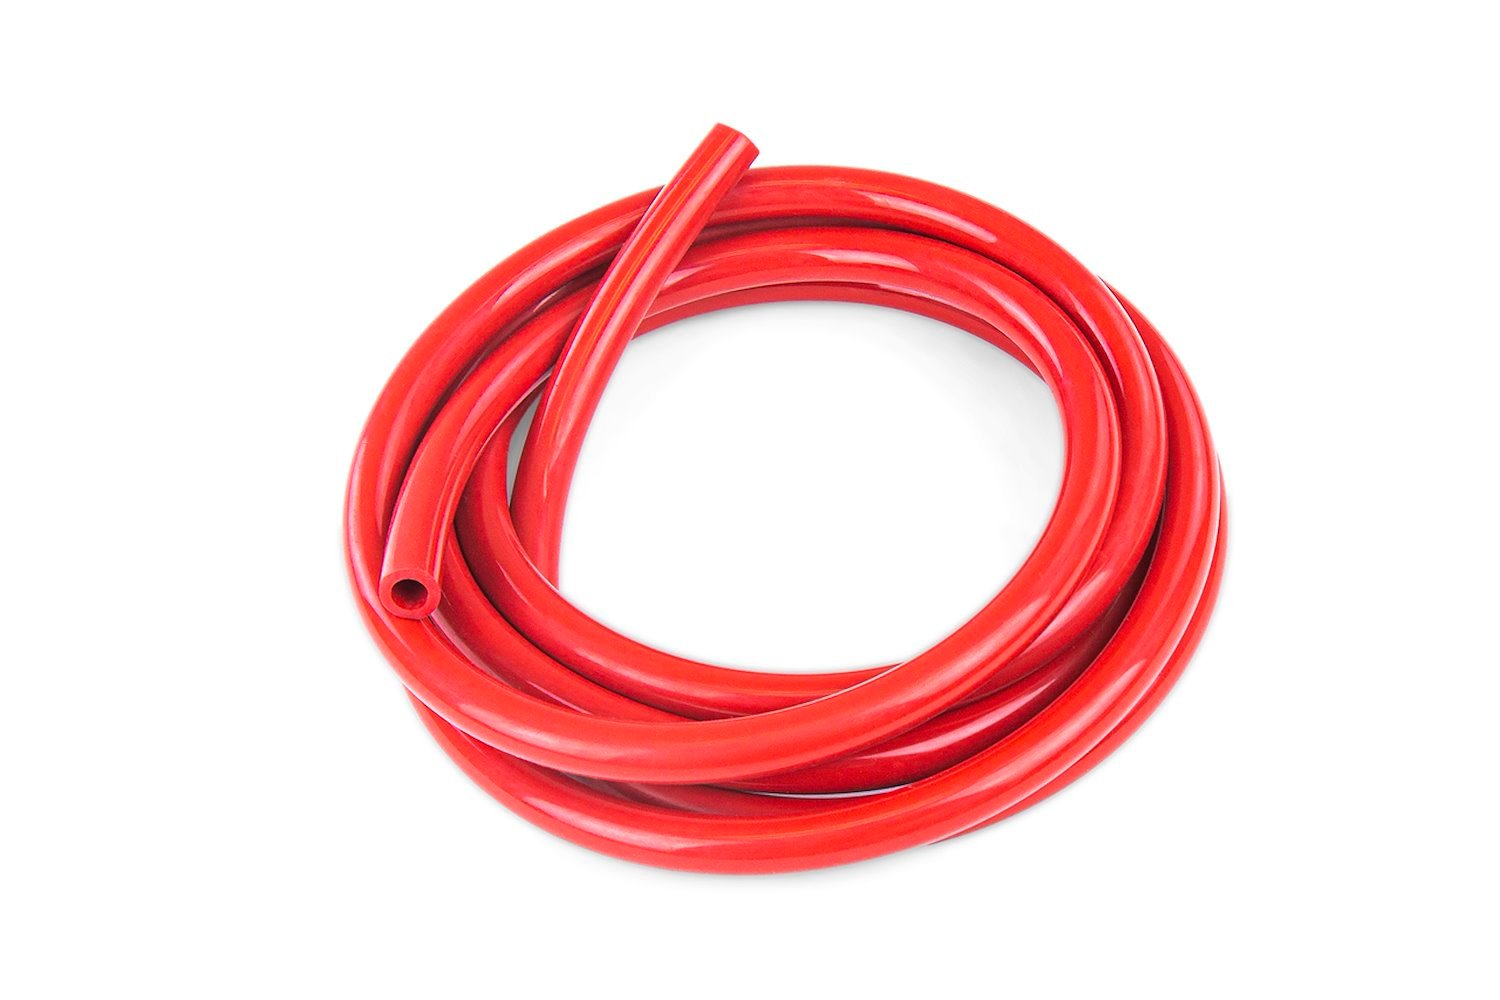 HTSVH8-REDx5 High-Temperature Silicone Vacuum Hose Tubing, 5/16 in. ID, 5 ft. Roll, Red